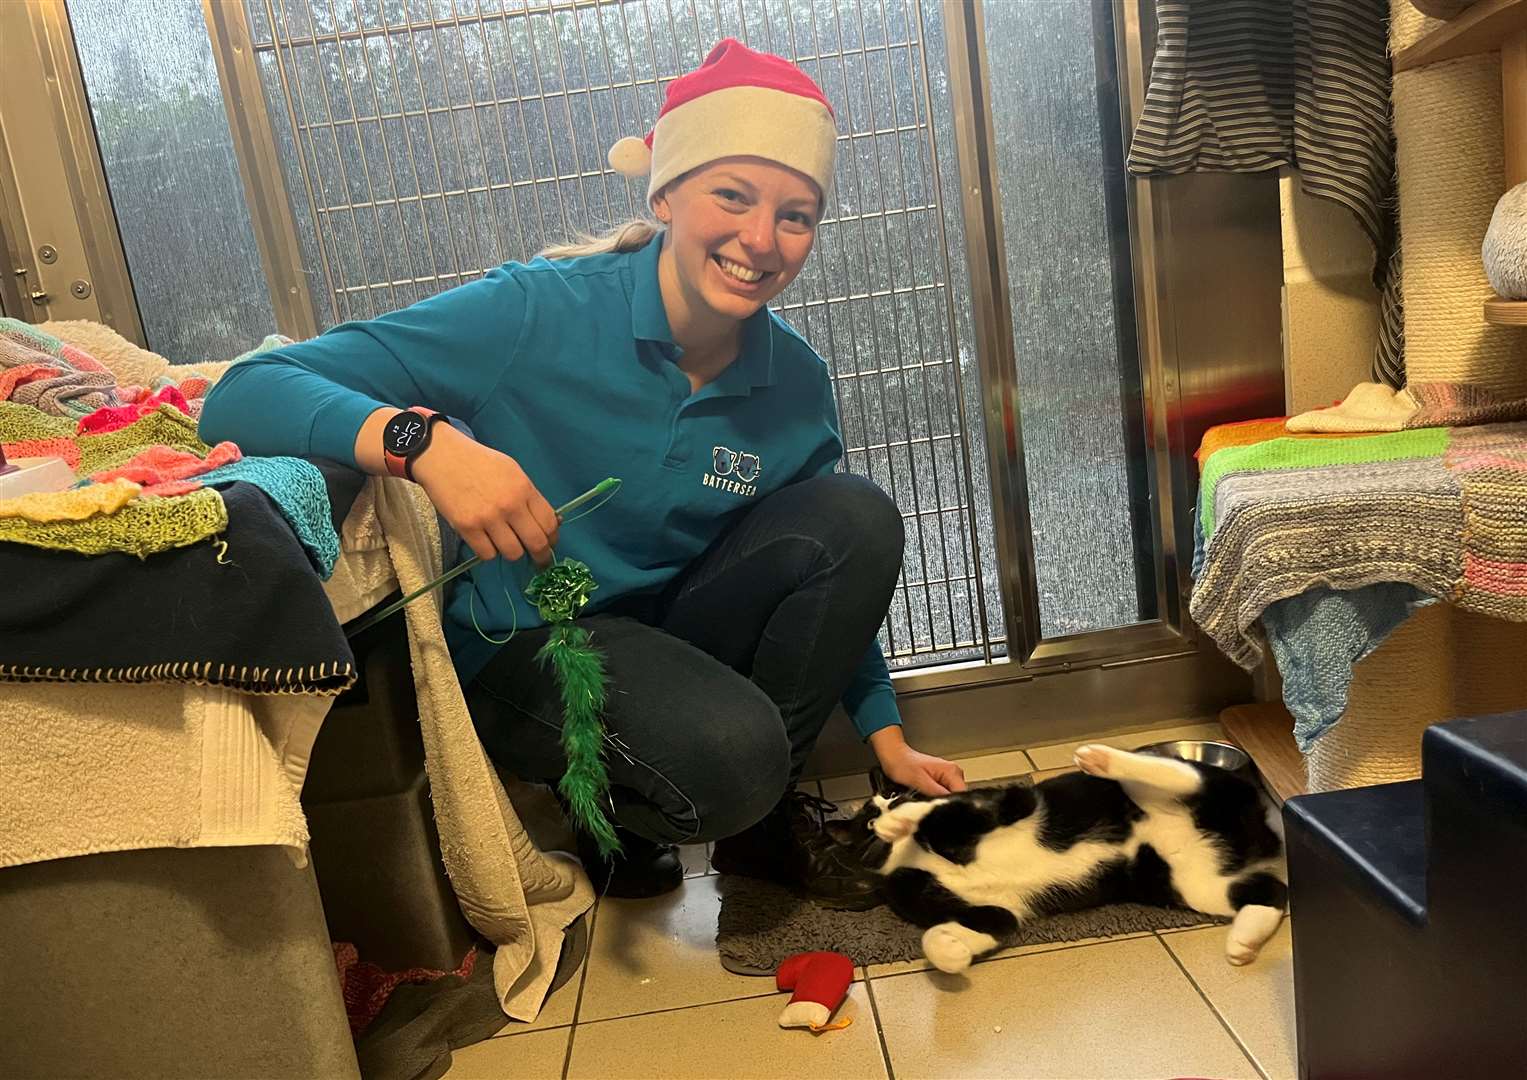 Cattery intake coordinator, Kathryn Davenport, helps Smudge get into the festive spirit